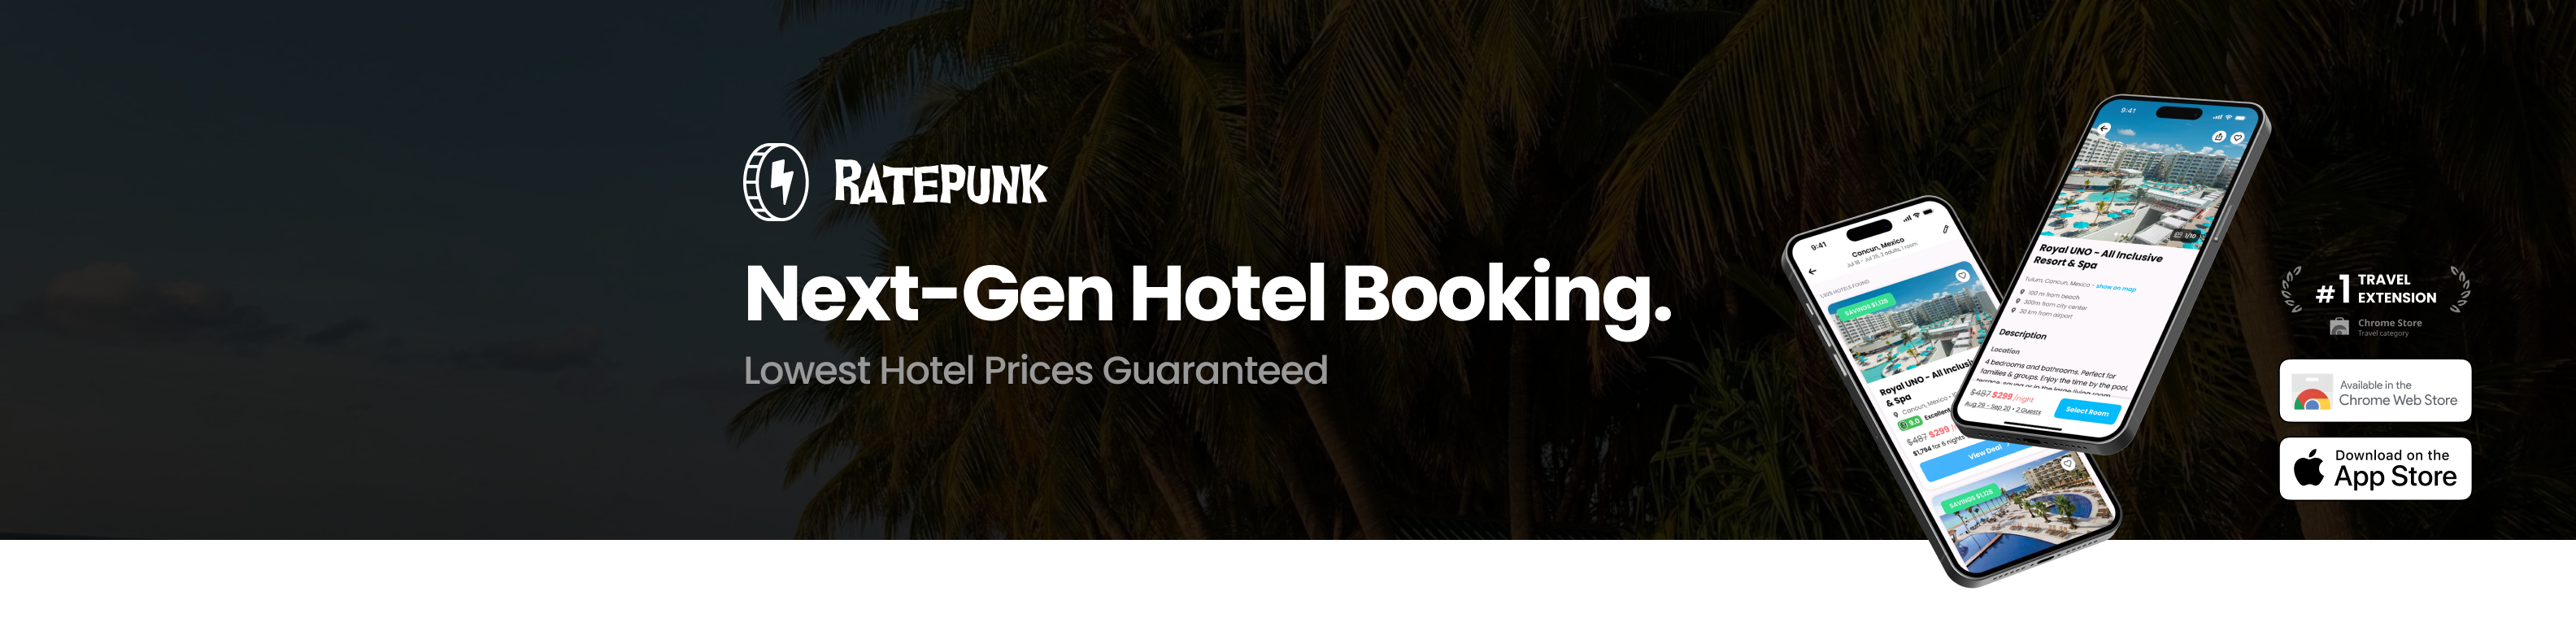 Ratepunk - next gen Hotel Booking Lowest Hotel Prices Guaranteed 